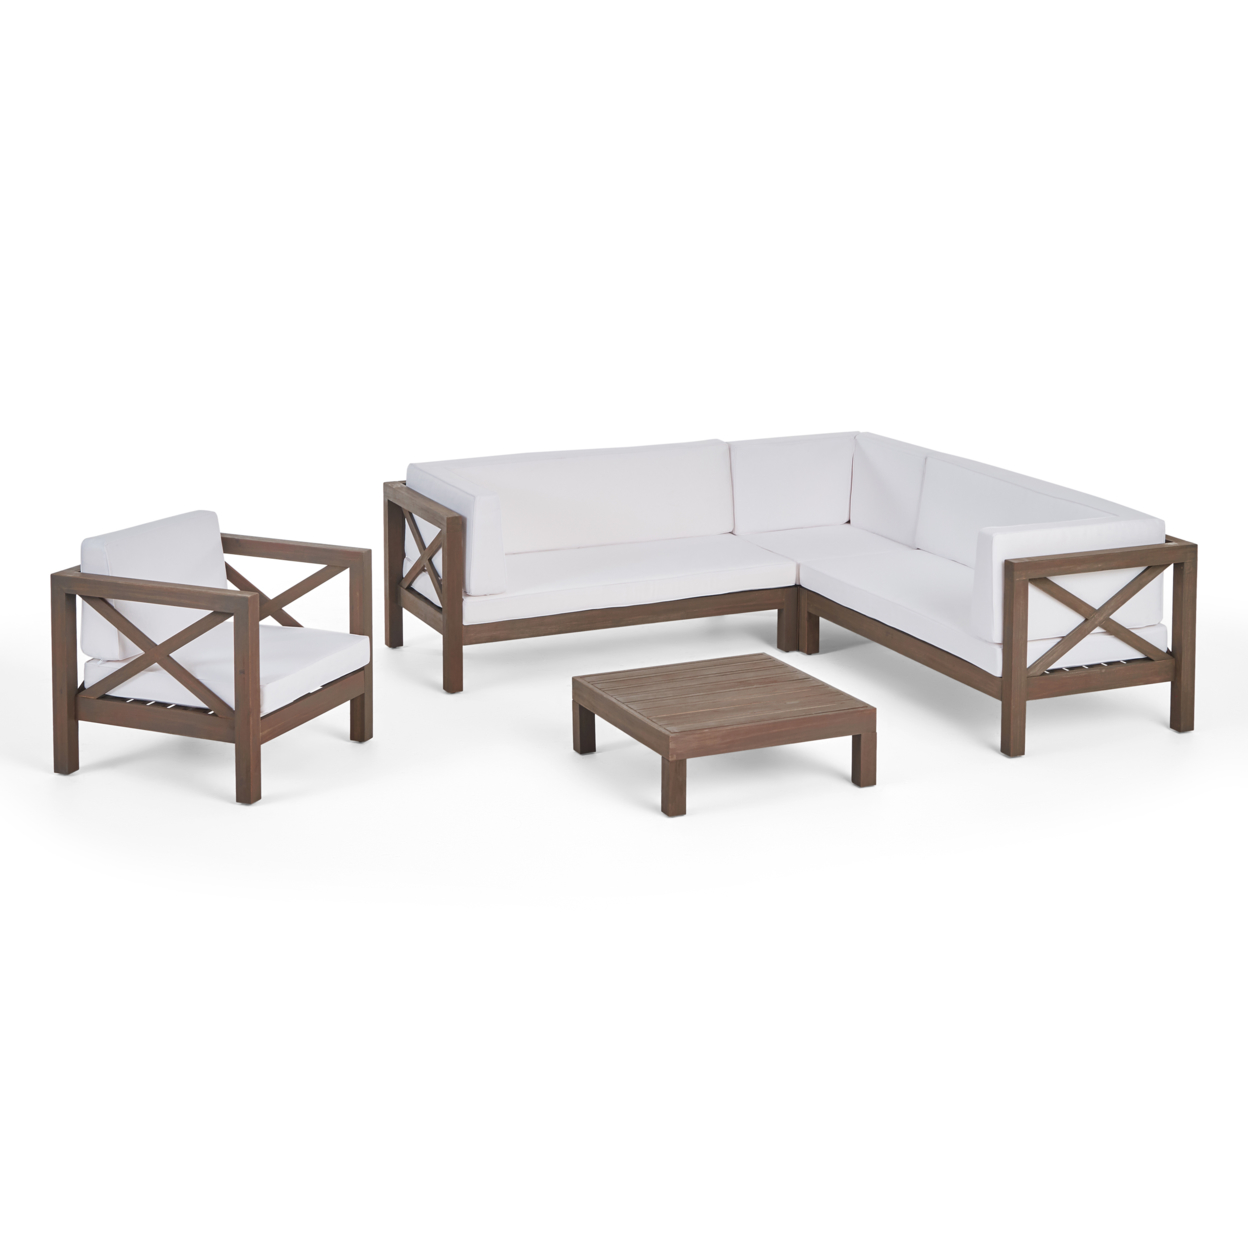 Morgan Outdoor 6 Seater Acacia Wood Sectional Sofa And Club Chair Set - Gray Finish + White